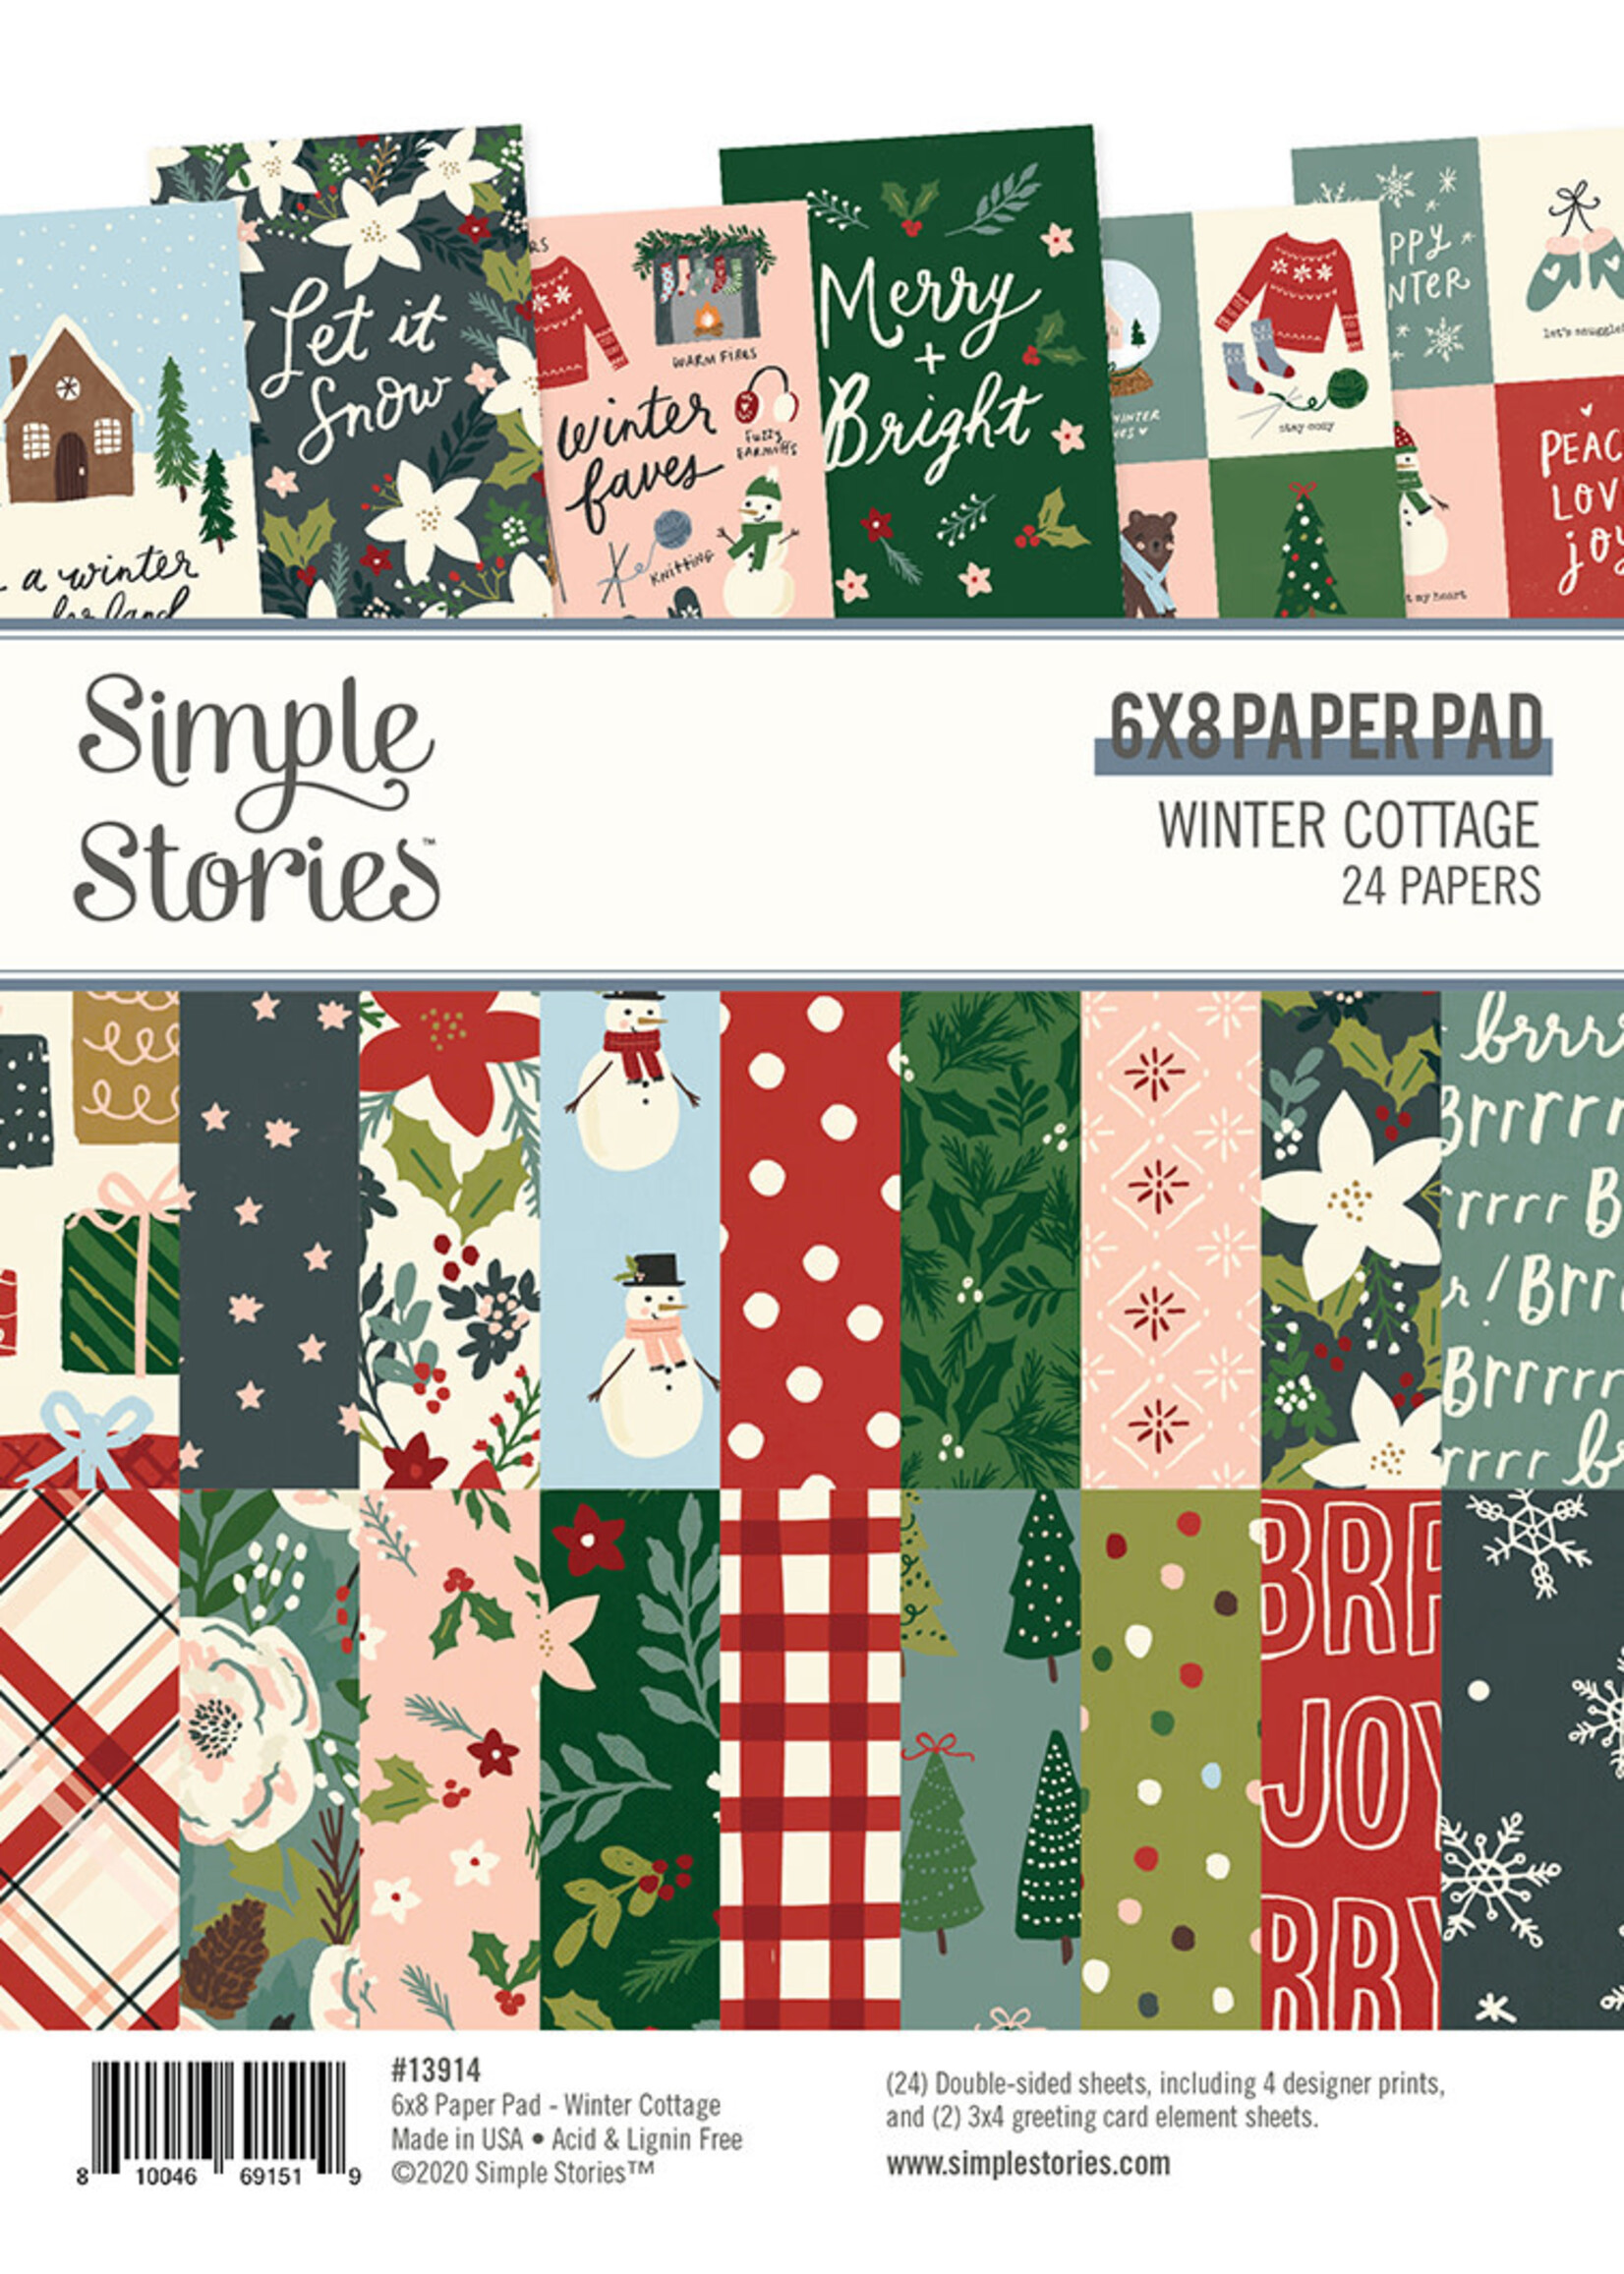 Simple Stories Winter Cottage: 6x8 Pad